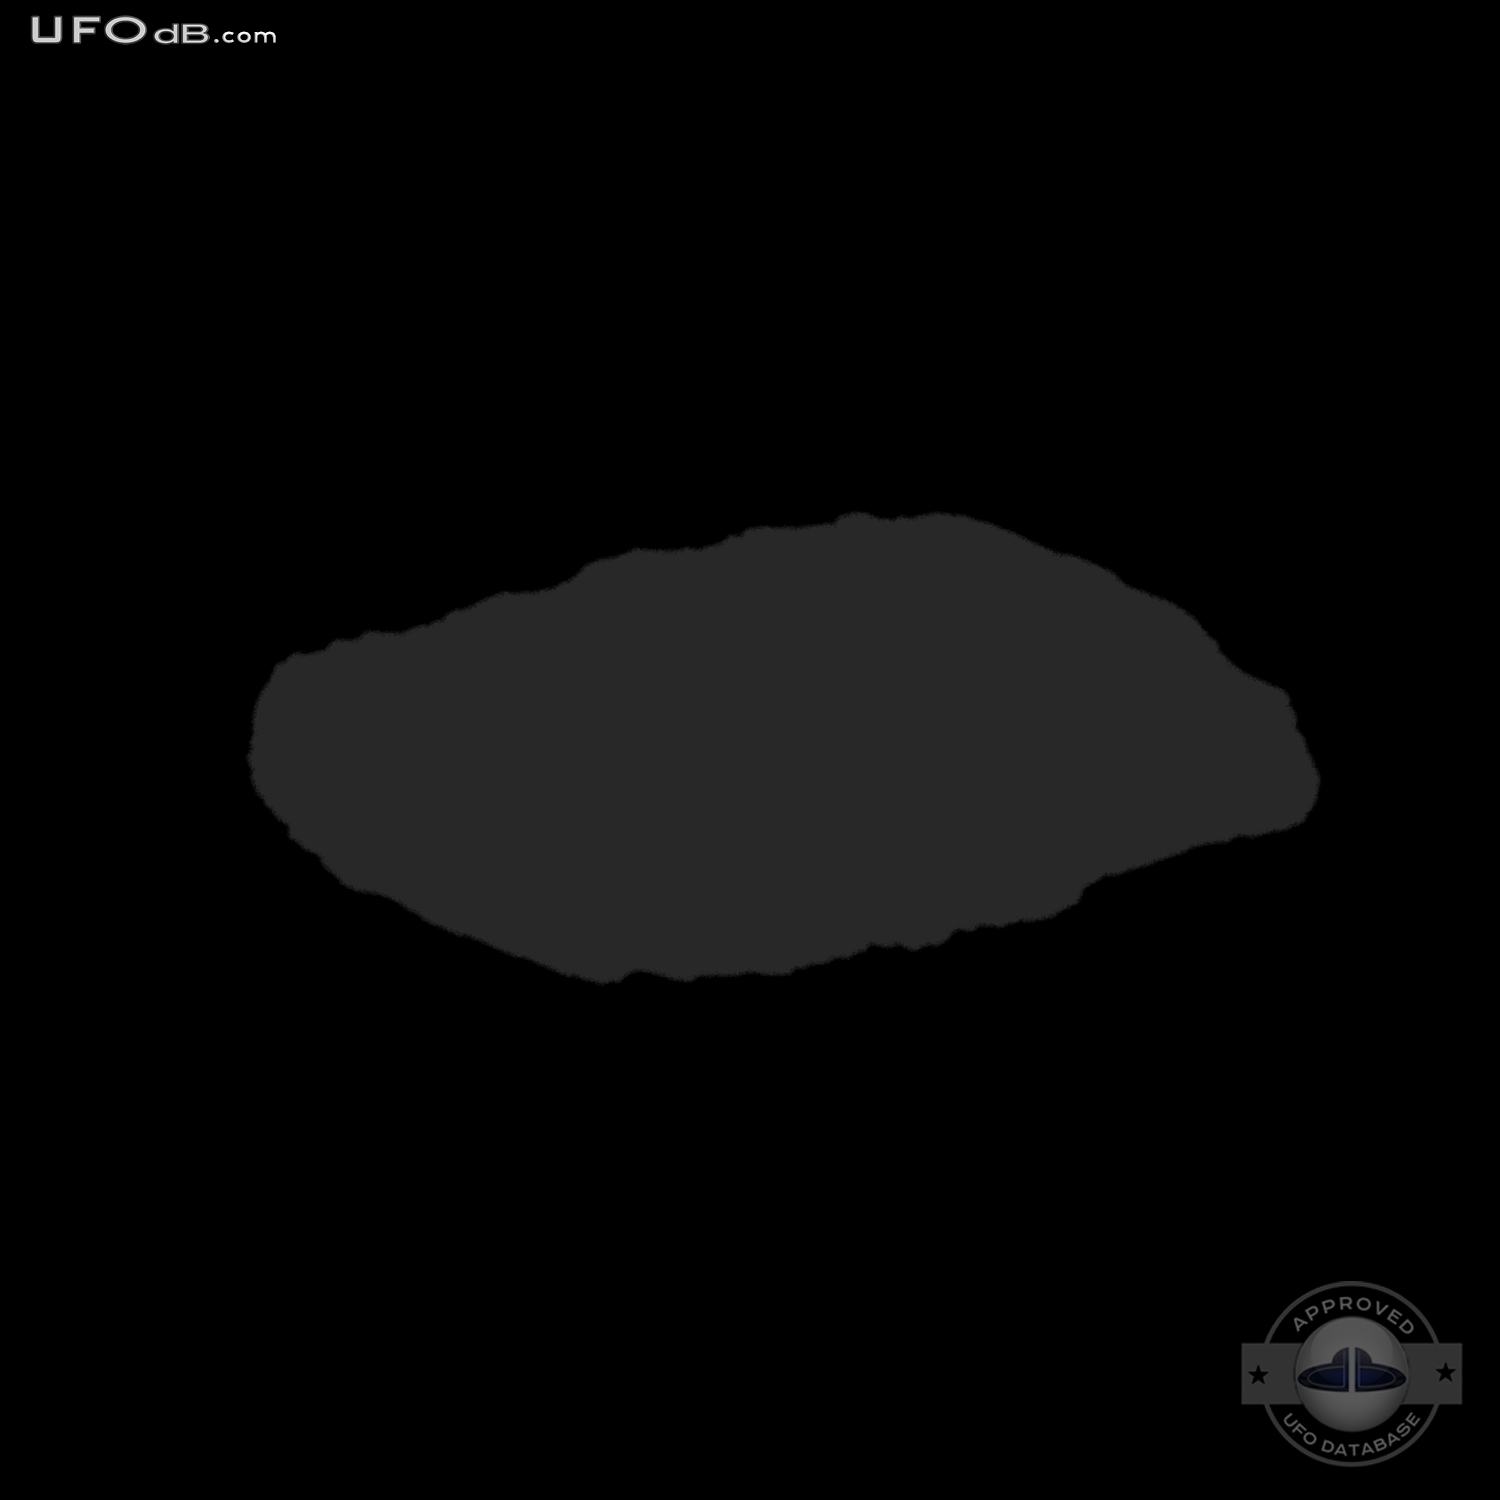 Humming whirring sounds heard with UFO picture | Hangzhou | April 2011 UFO Picture #332-9